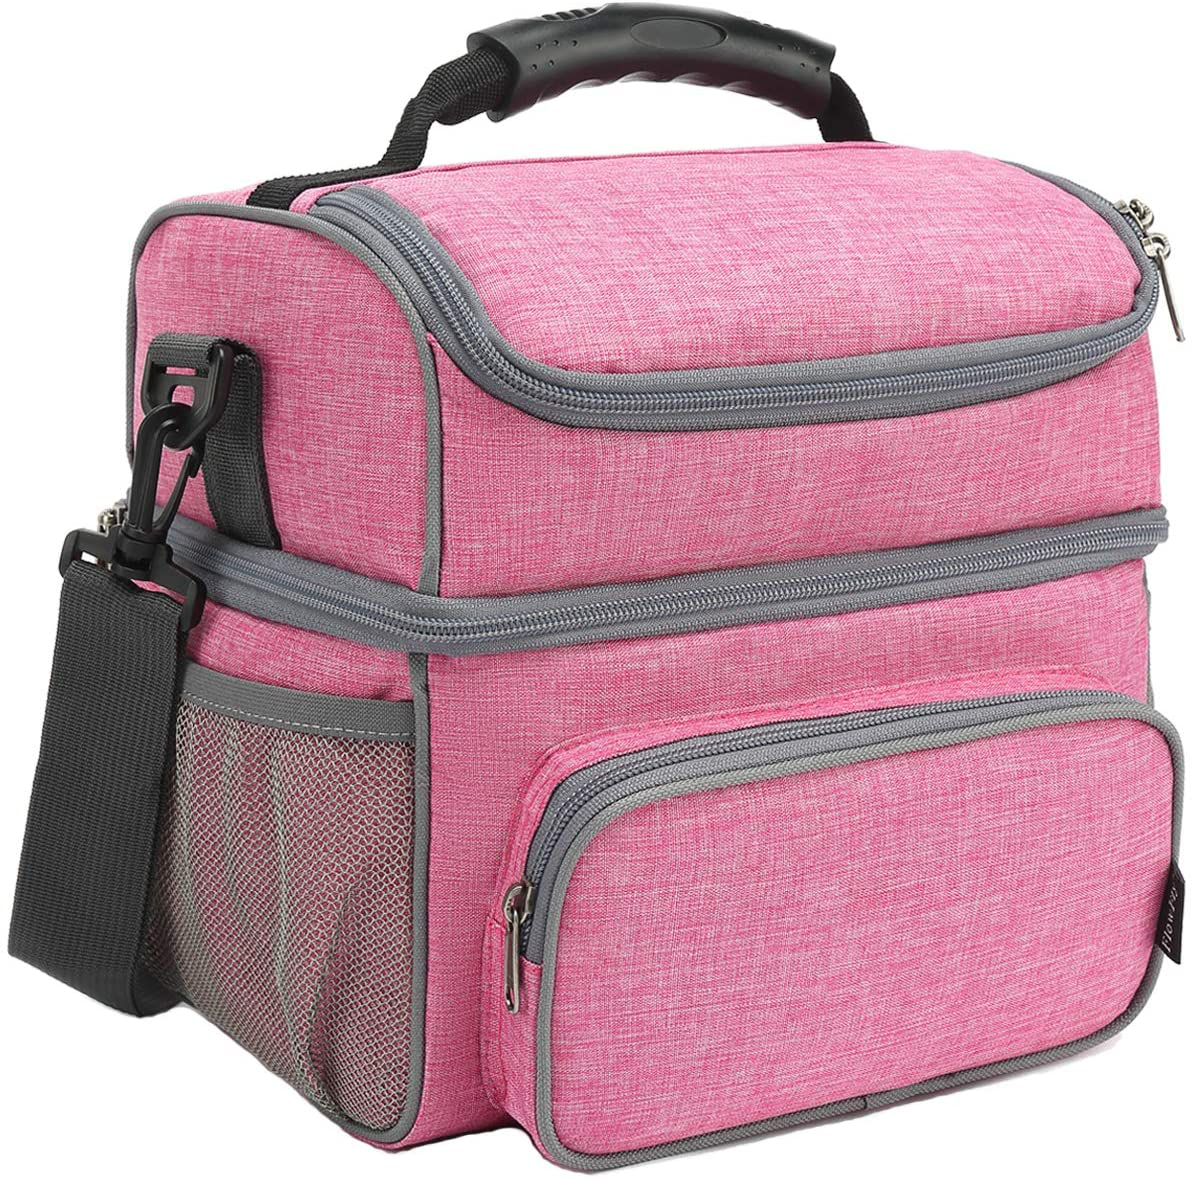 FlowFly Double Layer Cooler Insulated Lunch Bag Adult Lunch Box Large Tote Bag for Men, Women, With Adjustable Strap,Front Pocket and Dual Large Mesh Side Pockets,Pink